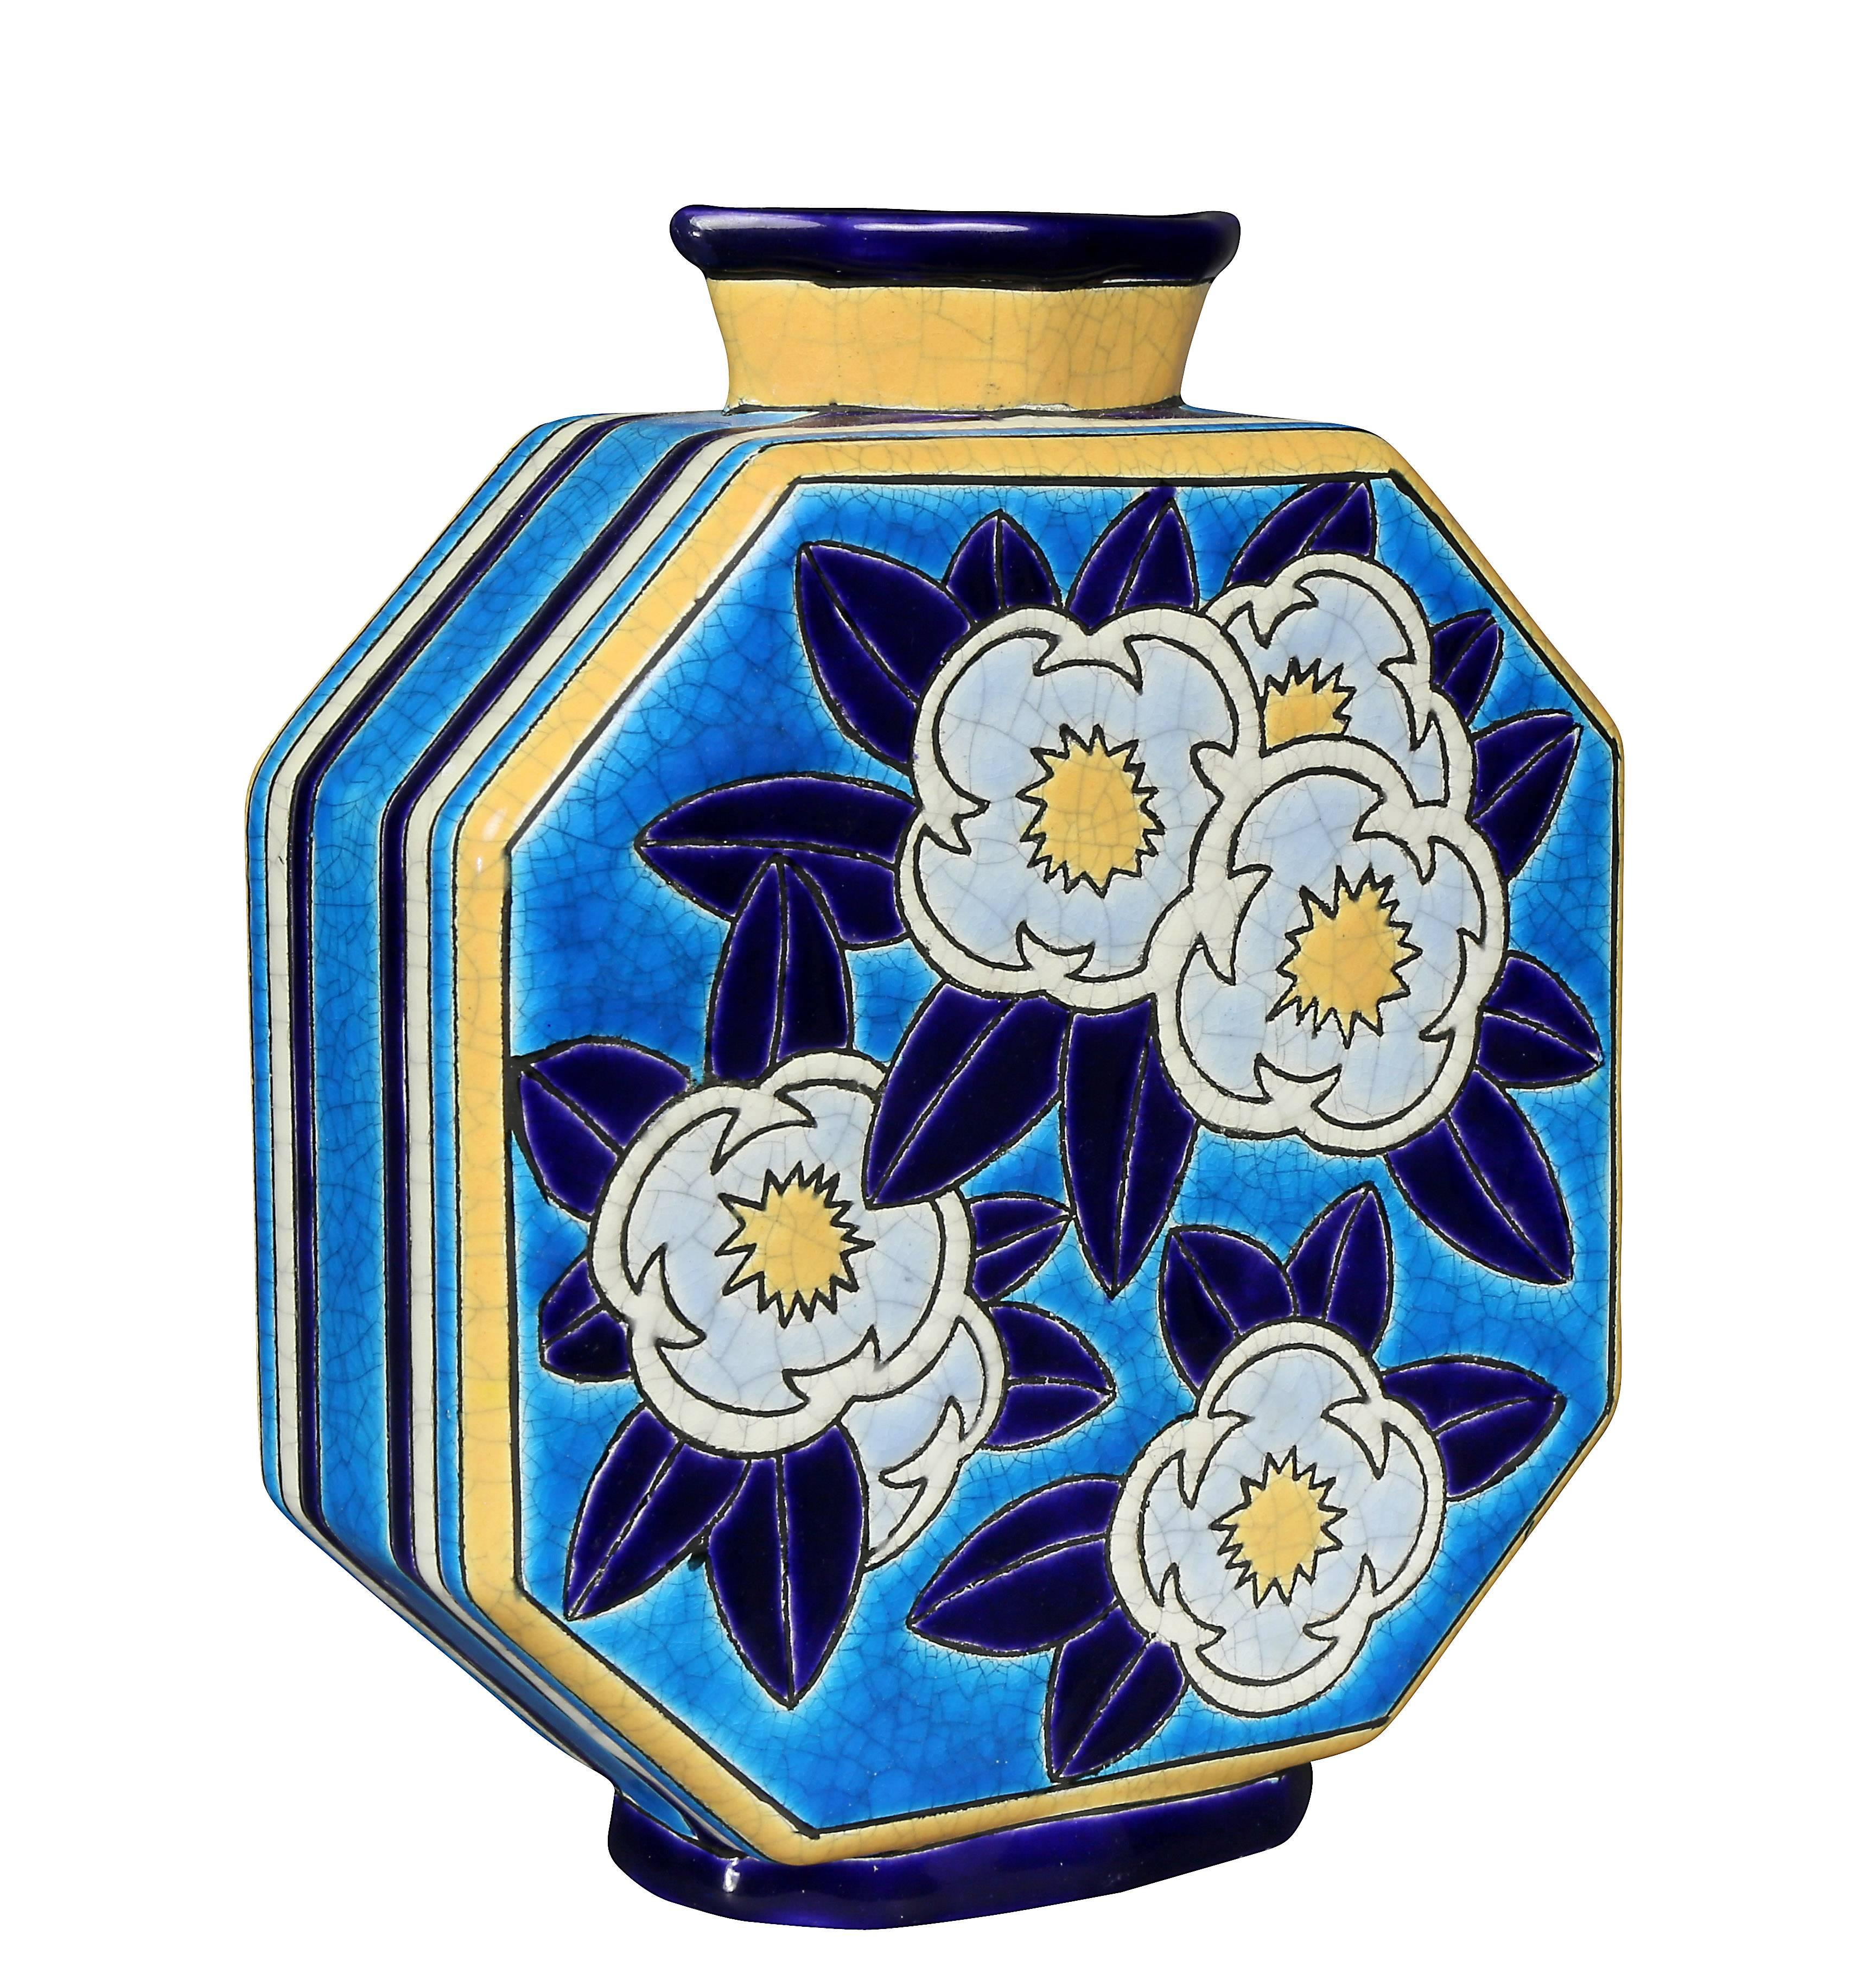 Octagonal flask form decorated in light and dark blue, yellows and white.